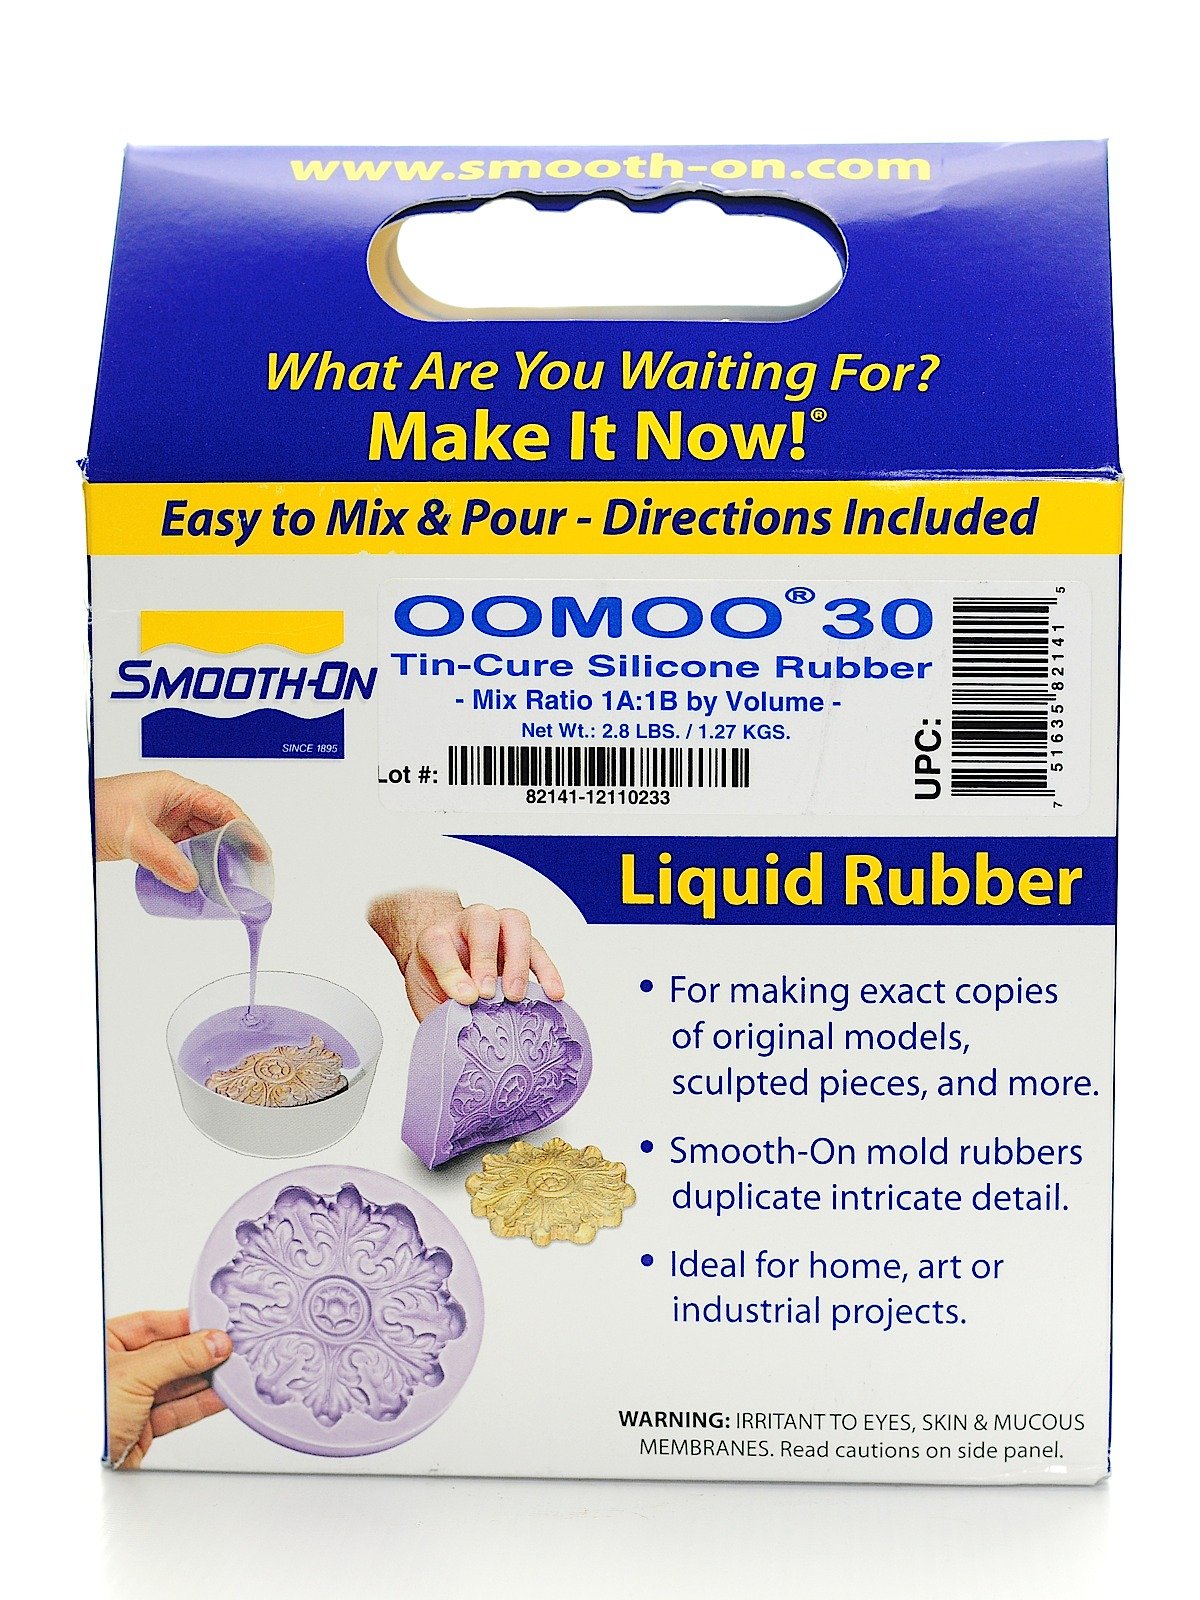 OOMOO 30-1A:1B Mix by Volume Tin Cure Silicone Algeria